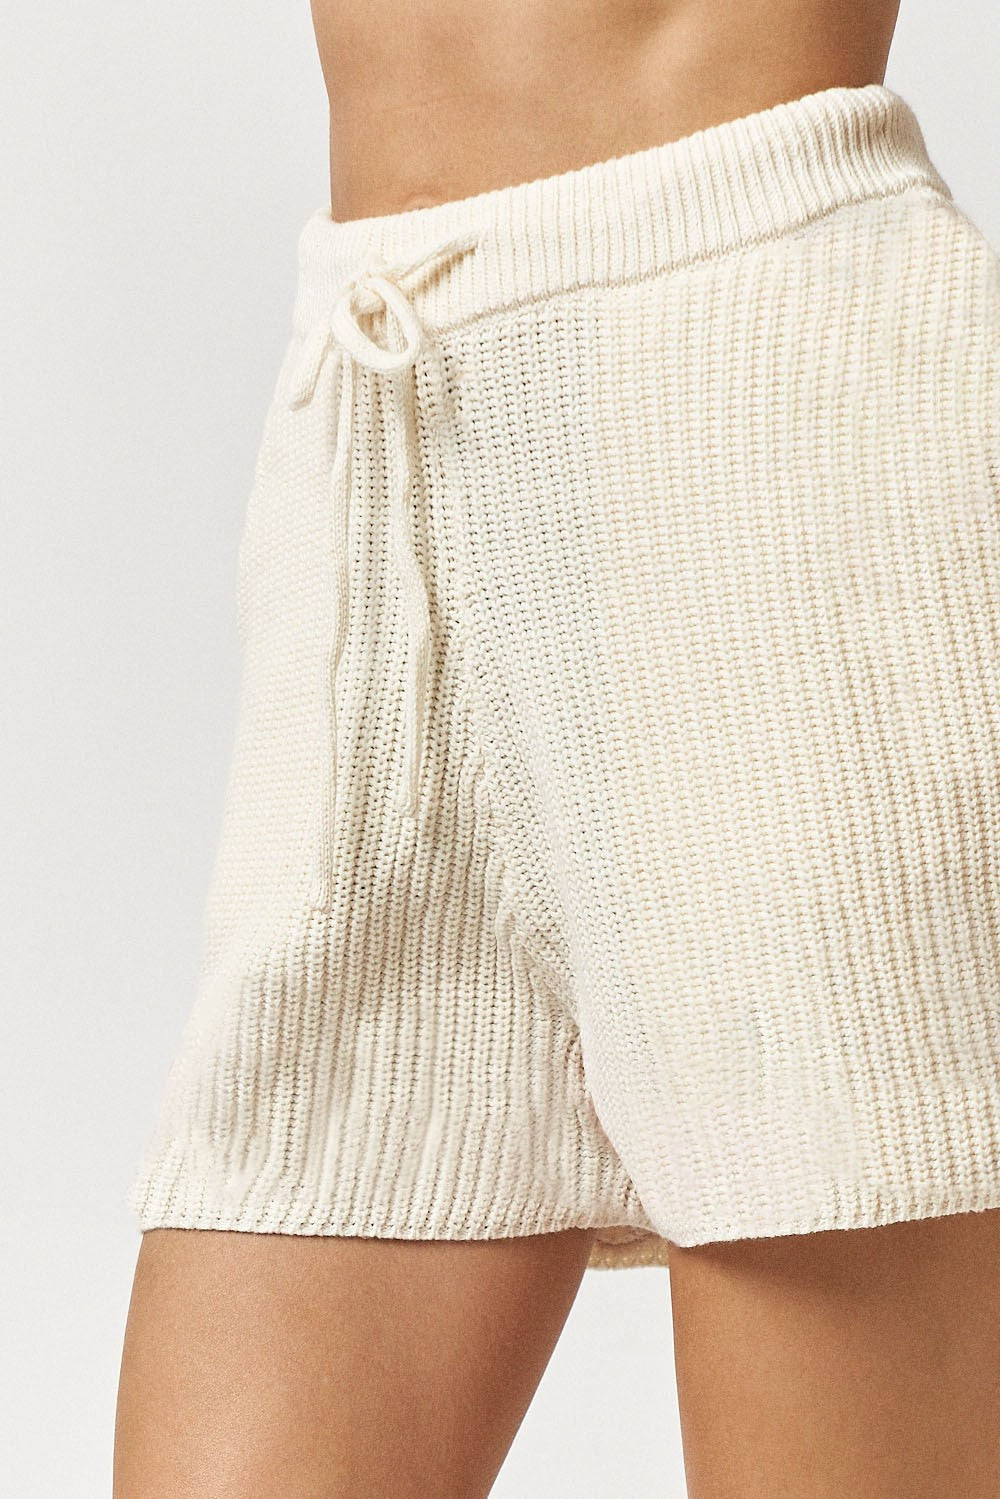 snuggle is real sweater shorts